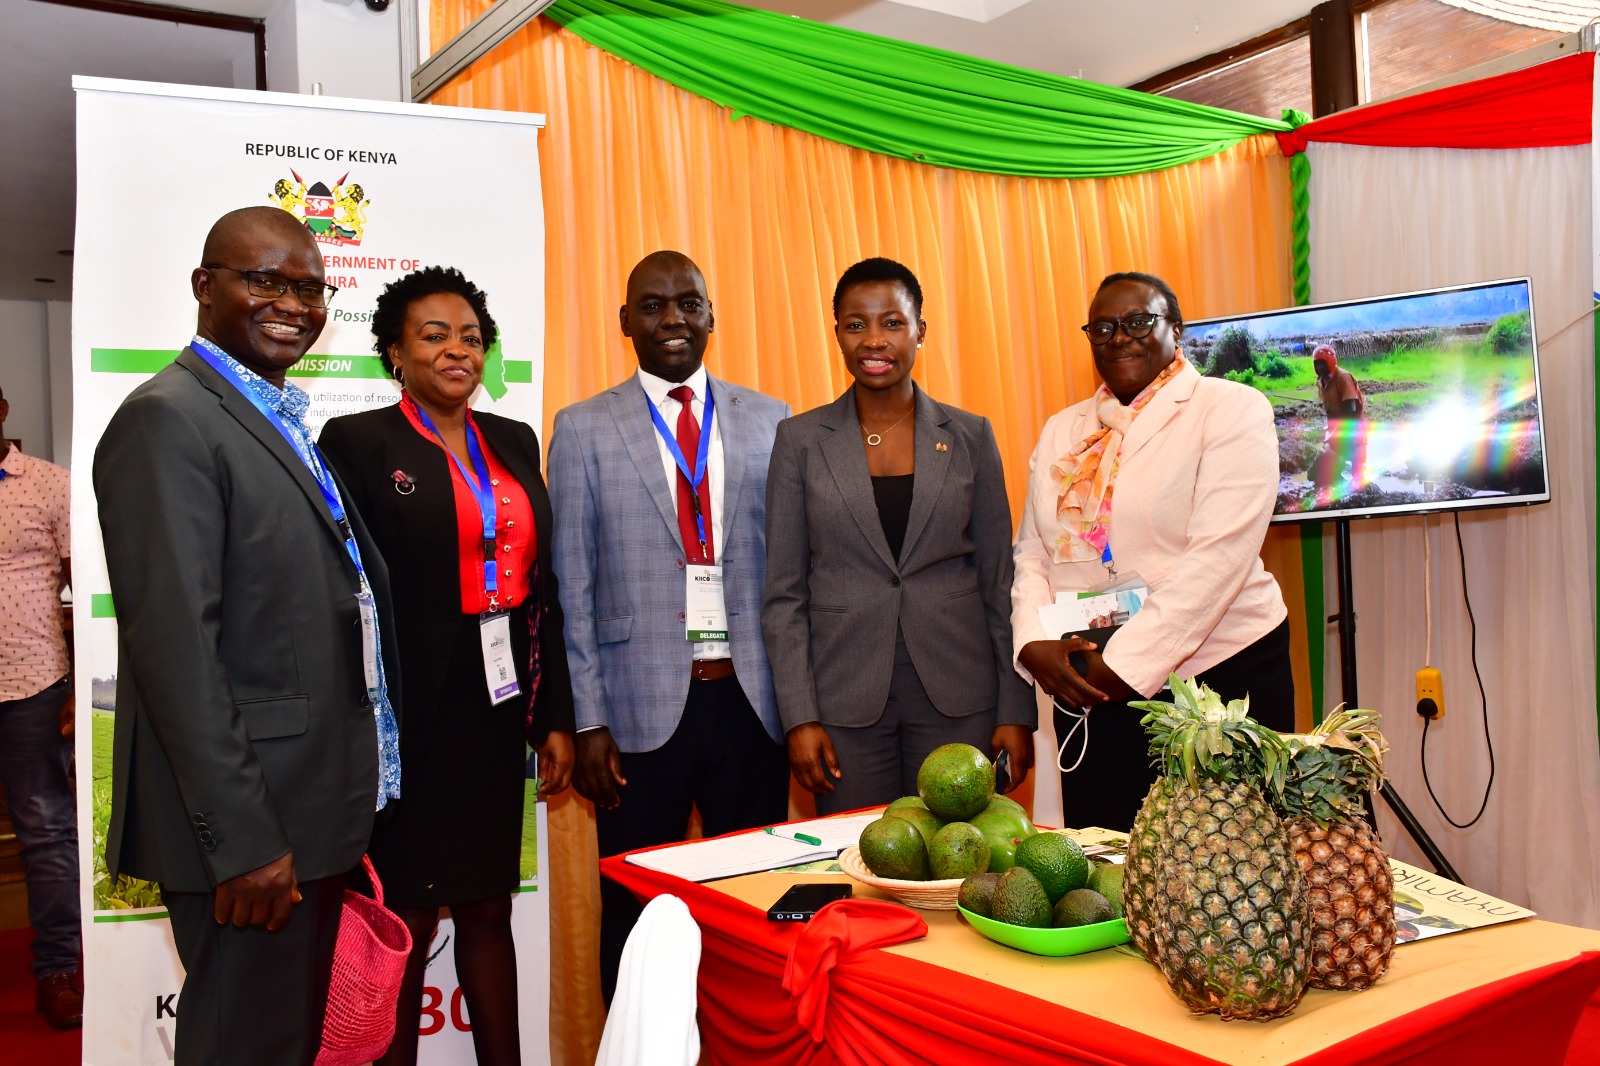 County Government of Nyamira Department  of Trade, Tourism, Industry and Cooperatives Development participate in the 3rd Kenya Investment Conference.